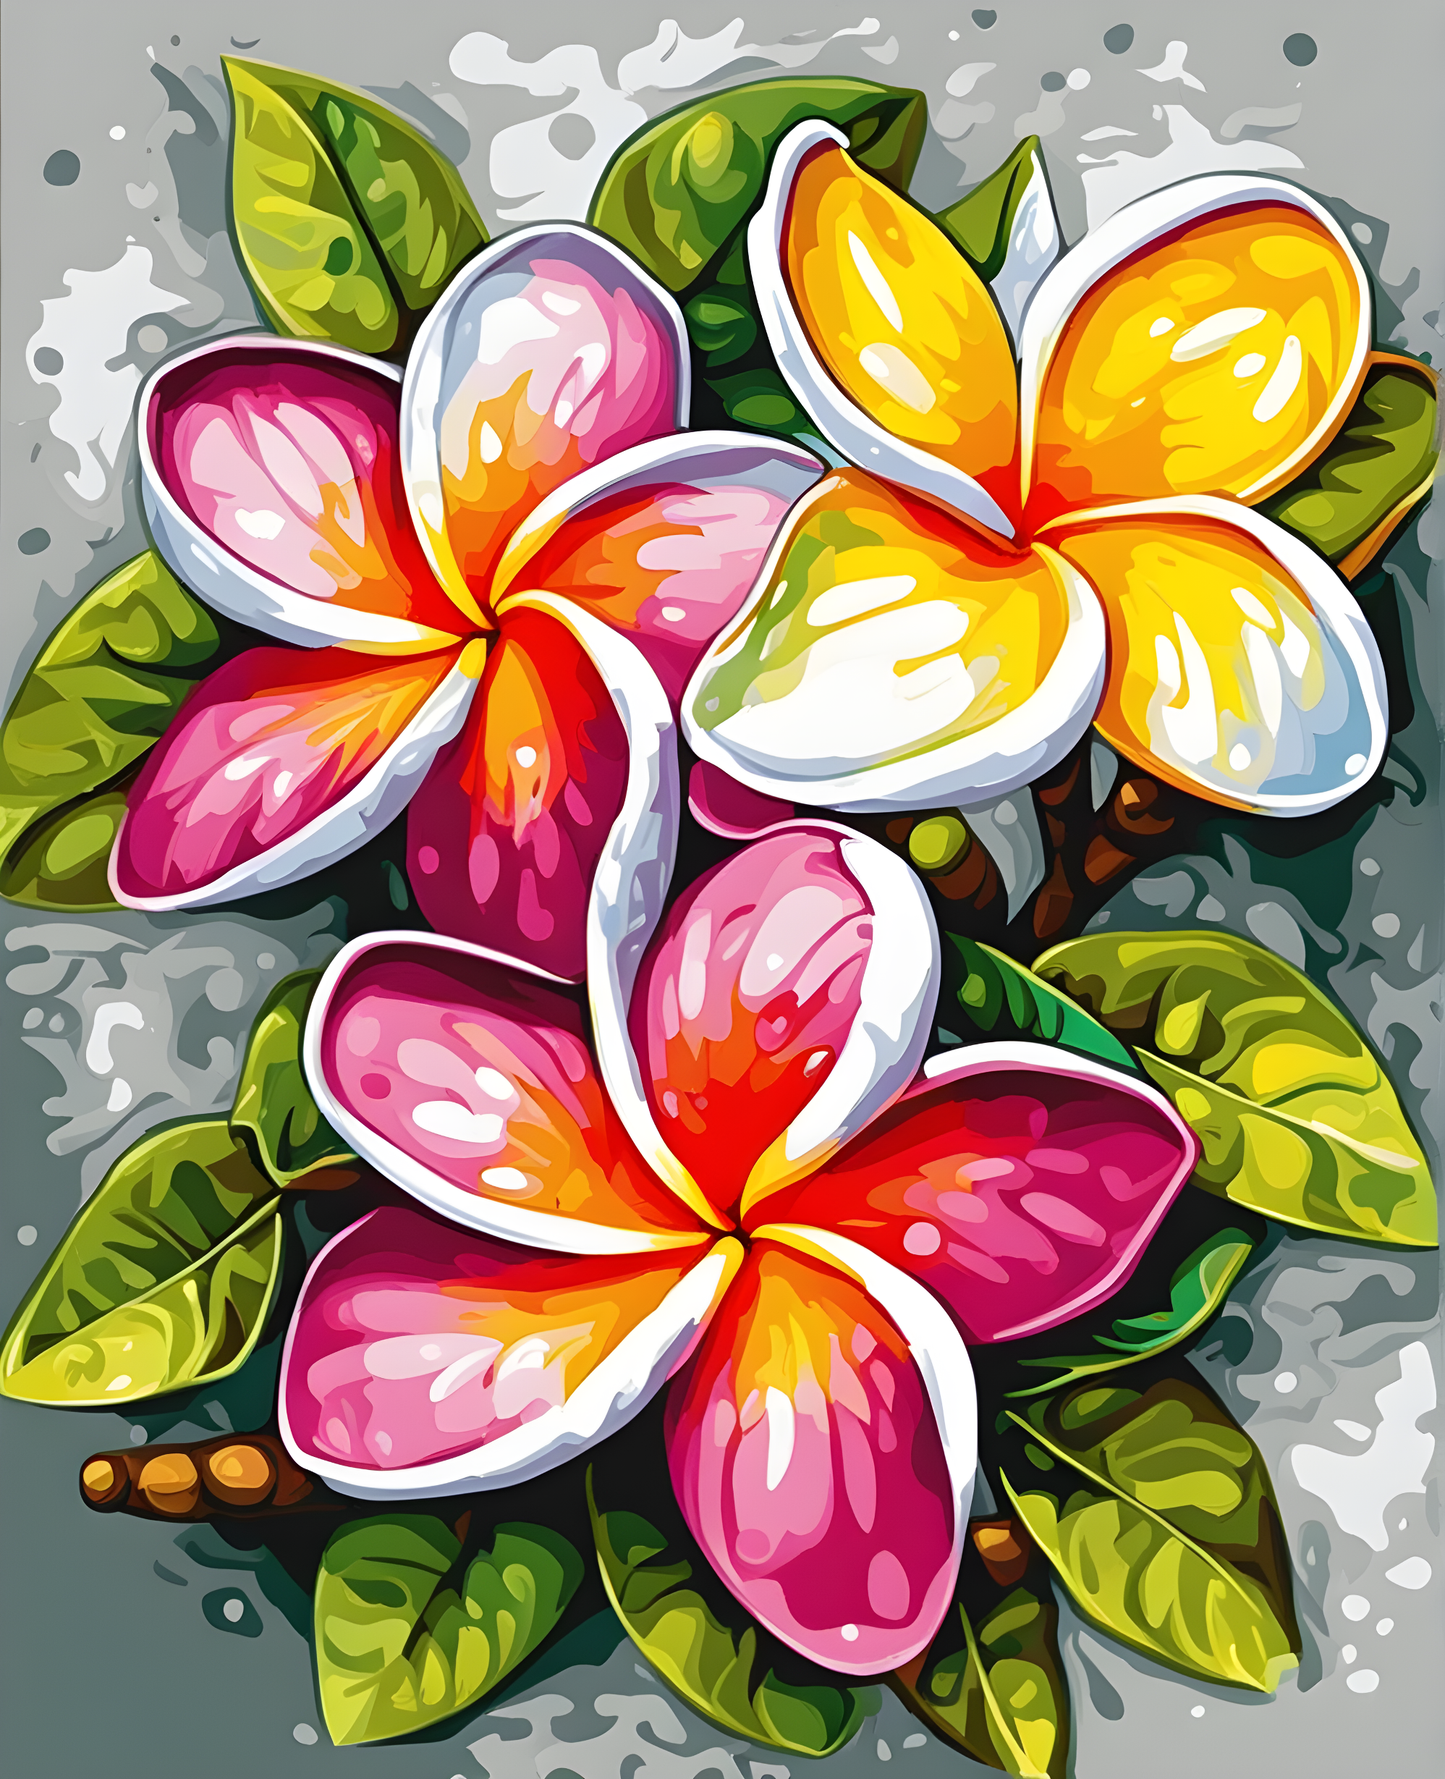 Flowers Collection OD (97) - Plumeria - Van-Go Paint-By-Number Kit